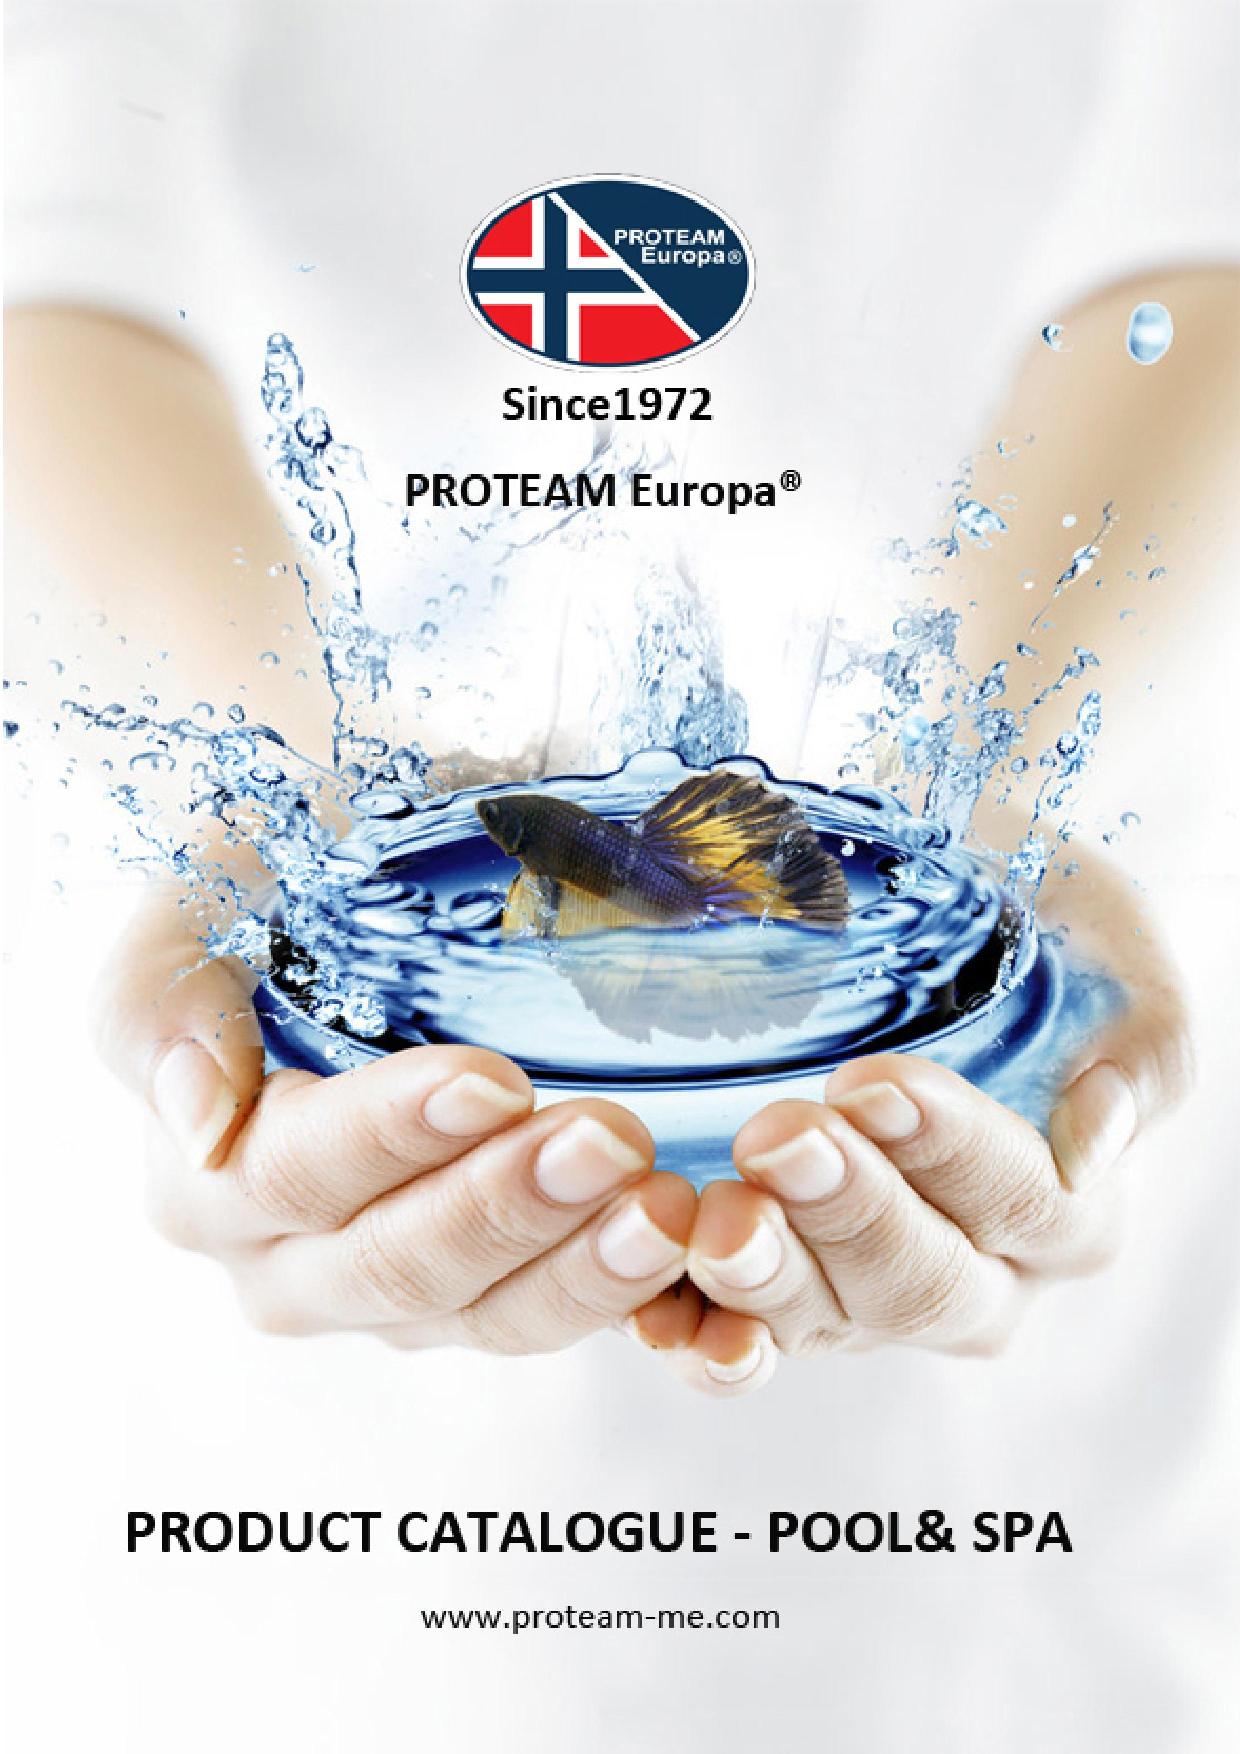 PROTEAM EUROPA WATER SOLUTIONS PVT LTD